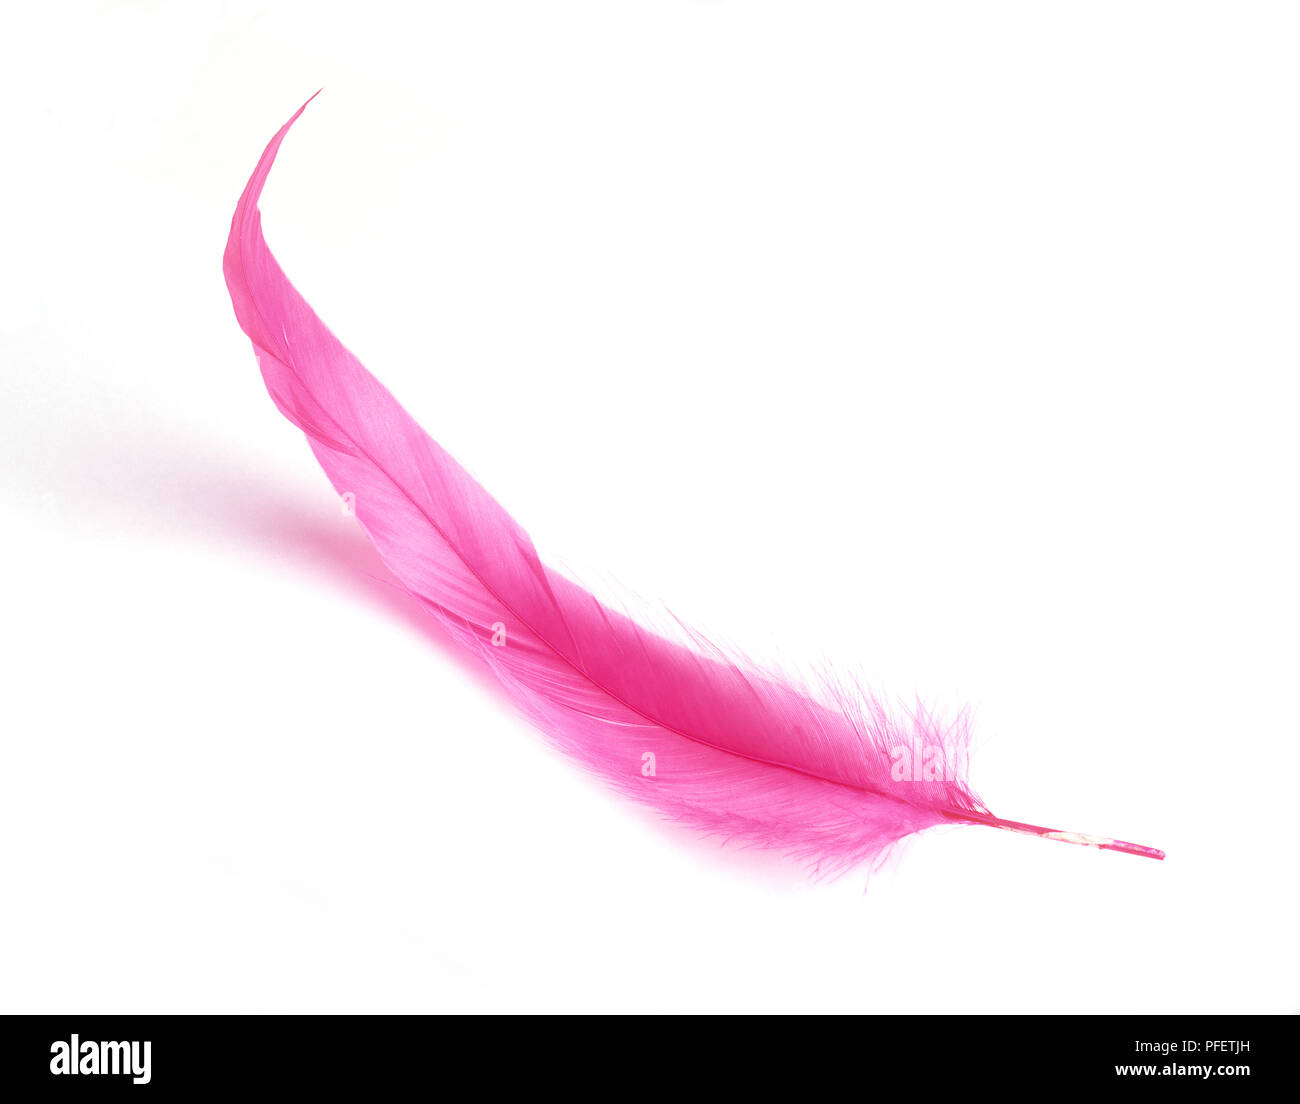 A pink feather Stock Photo